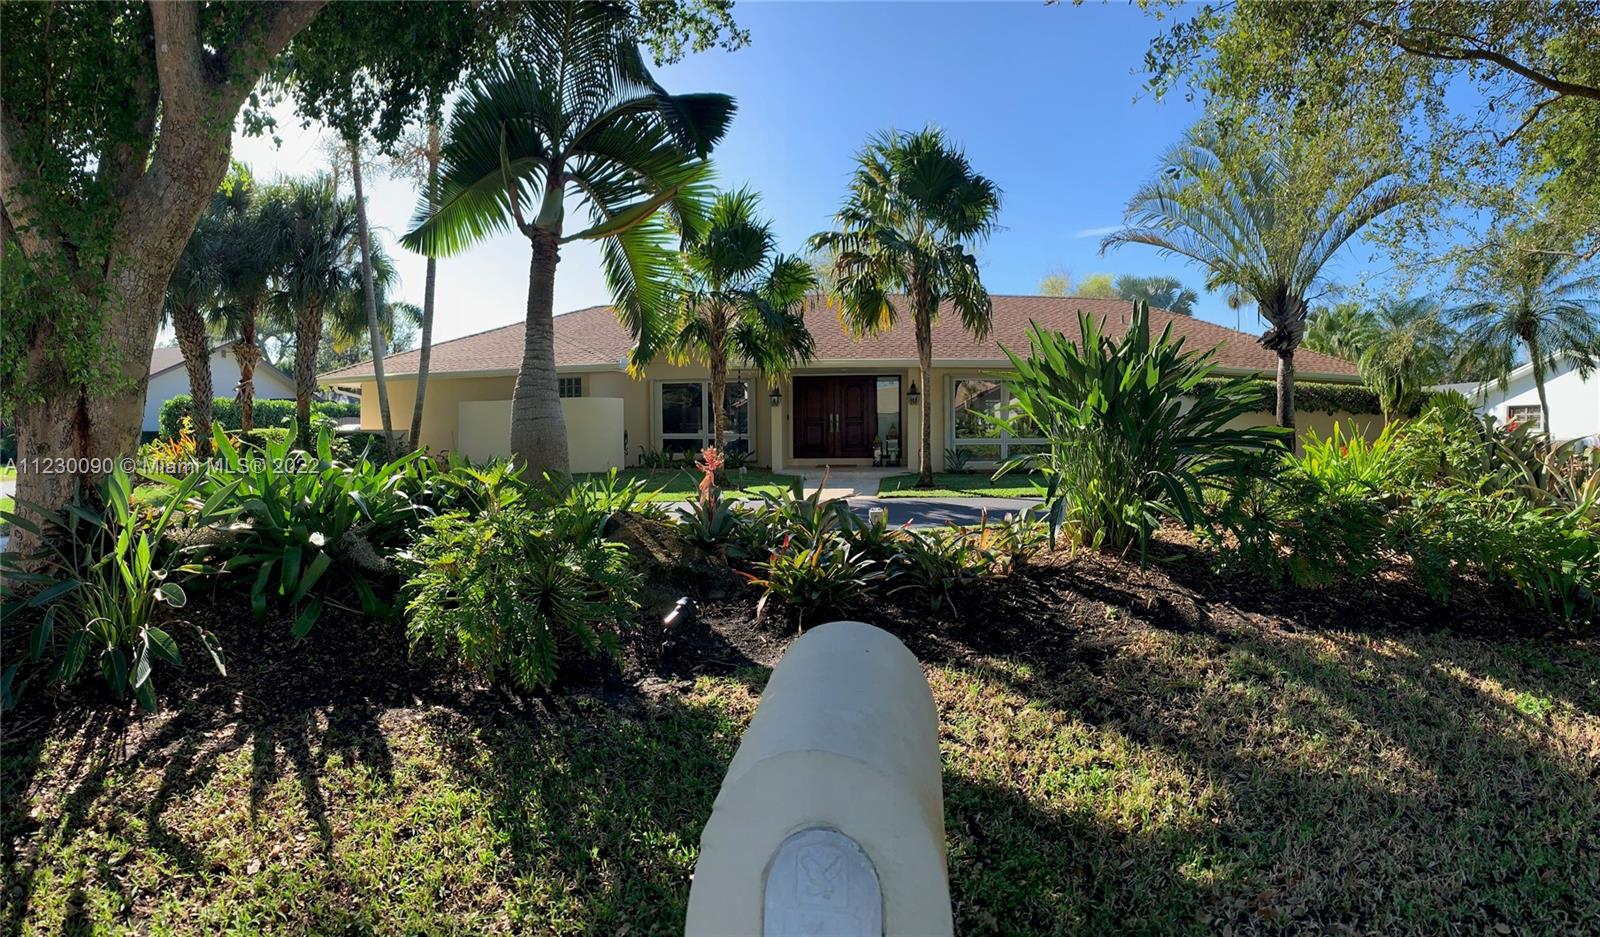 Georges and bright, immaculate house in Palmetto Bay. Quiet street, close to wonderful private and public school. Great social spaces inside and outside, ideal for friends and family entertaining. MUST SEE!!